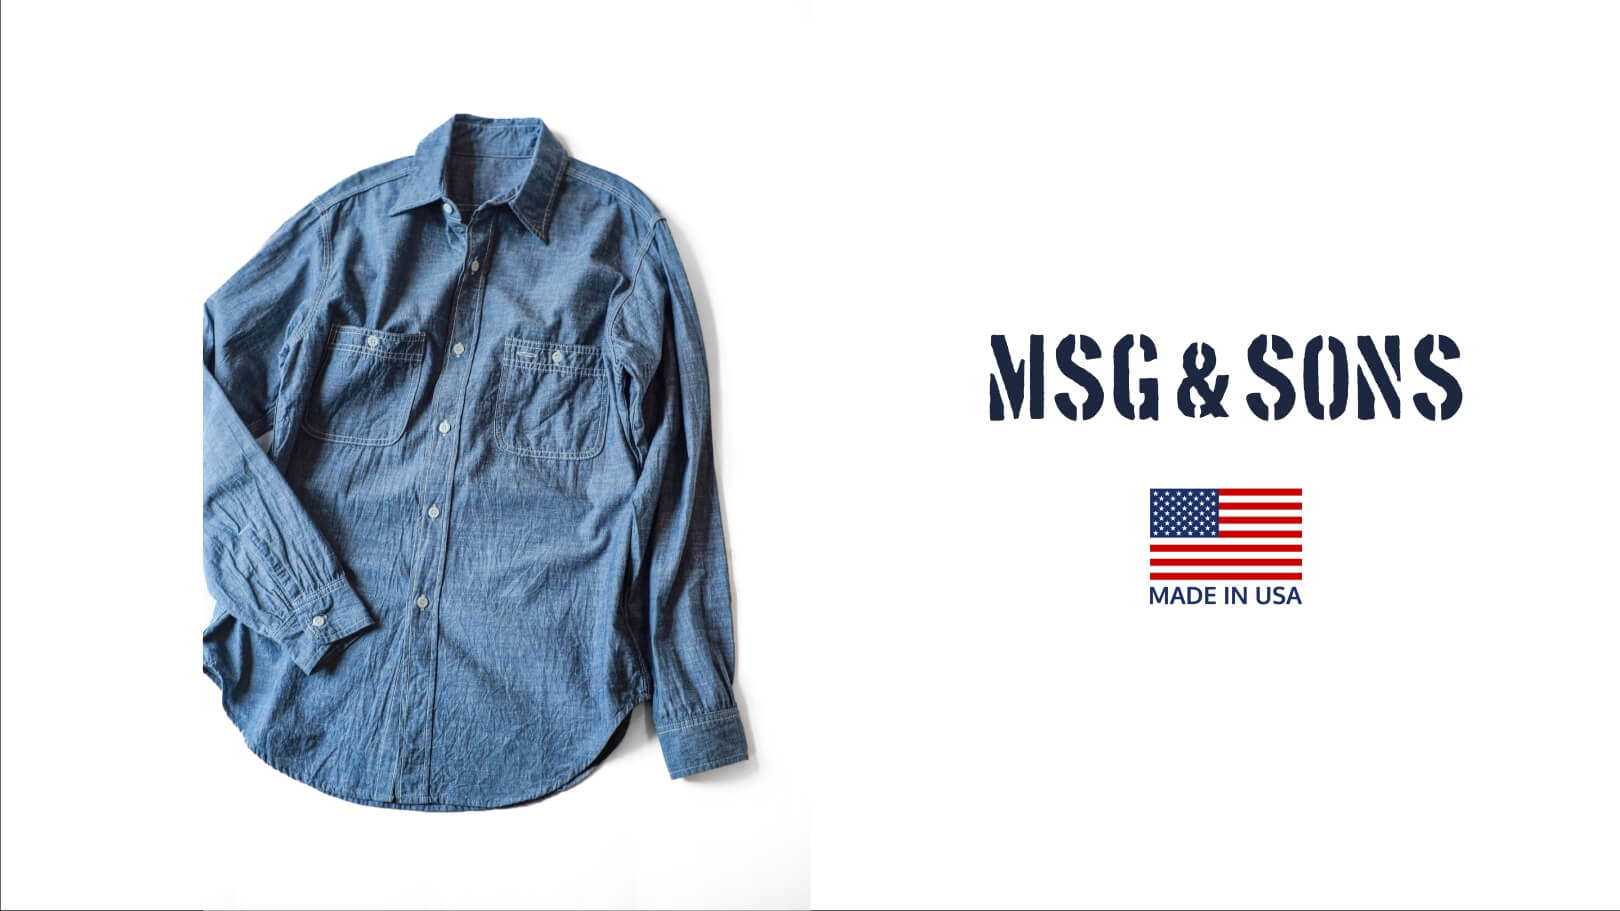 MSG & SONS CHAMBRAY SHIRT – MADE IN USA